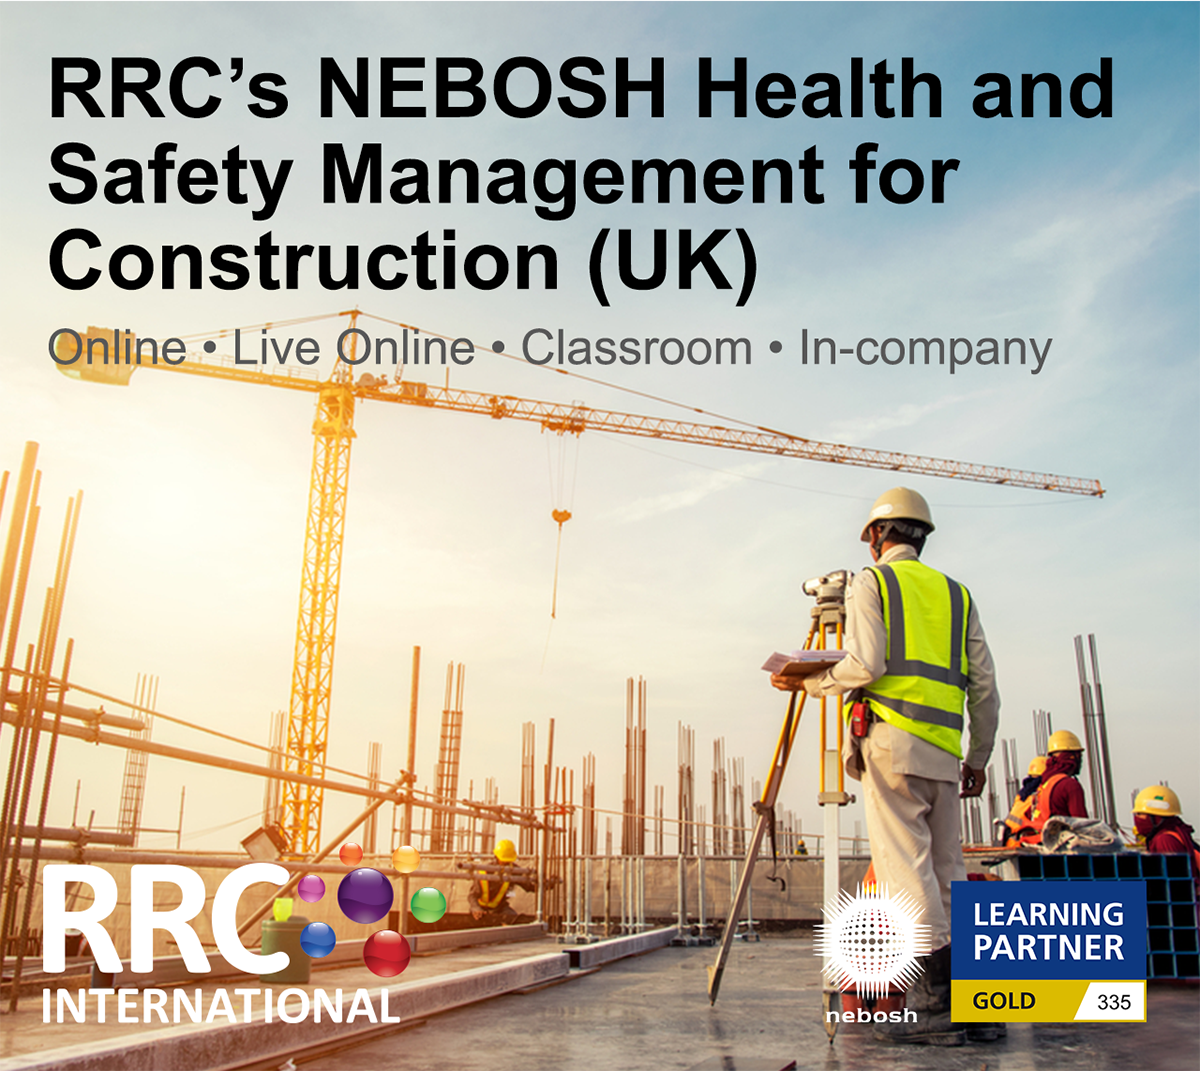 RRC's NEBOSH Health and Safety Management for Construction (UK)